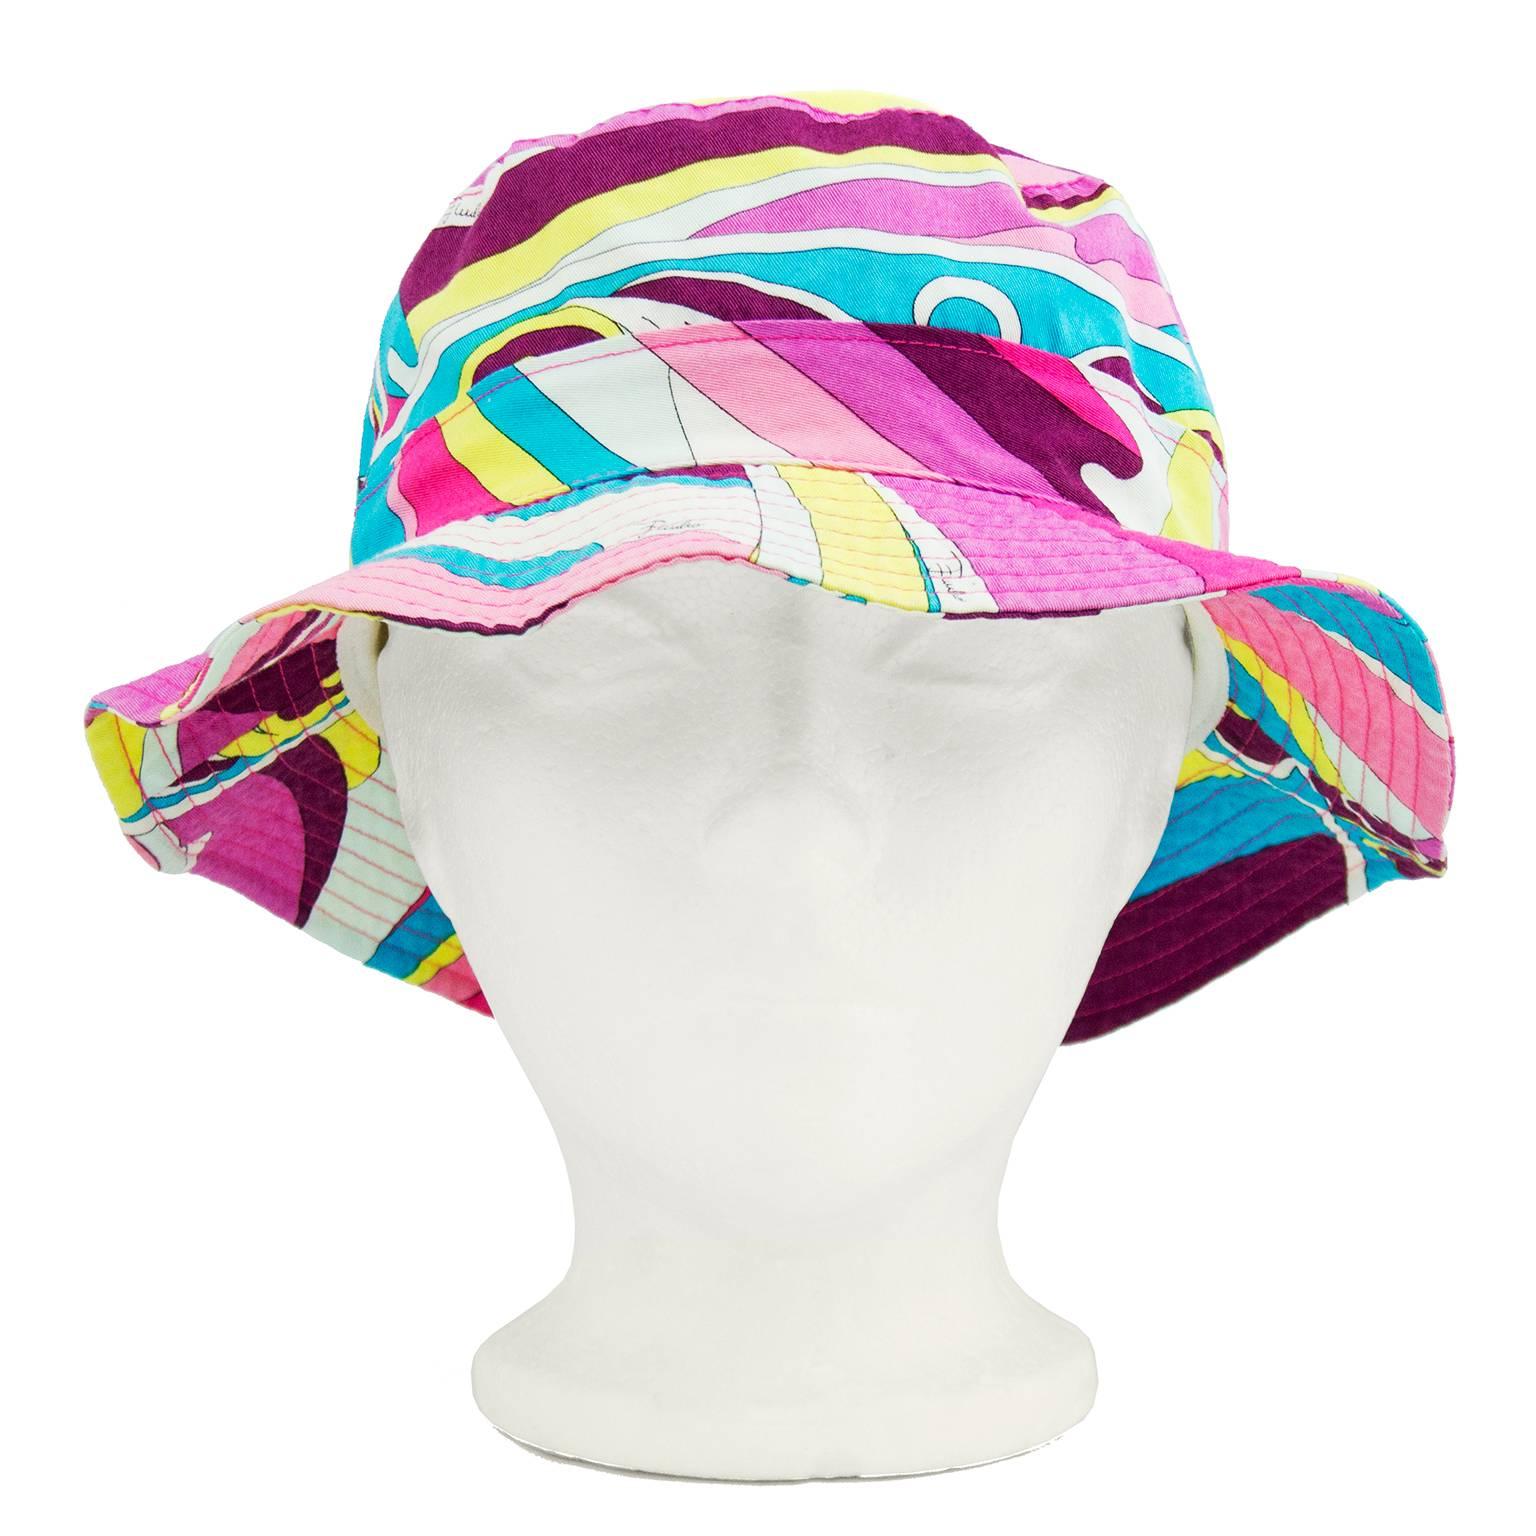 Adorable Pucci multi-color printed cotton bucket hat circa 2000's with signature abstract pattern throughout, and pink top stitching. Excellent condition. 22” in circumference.